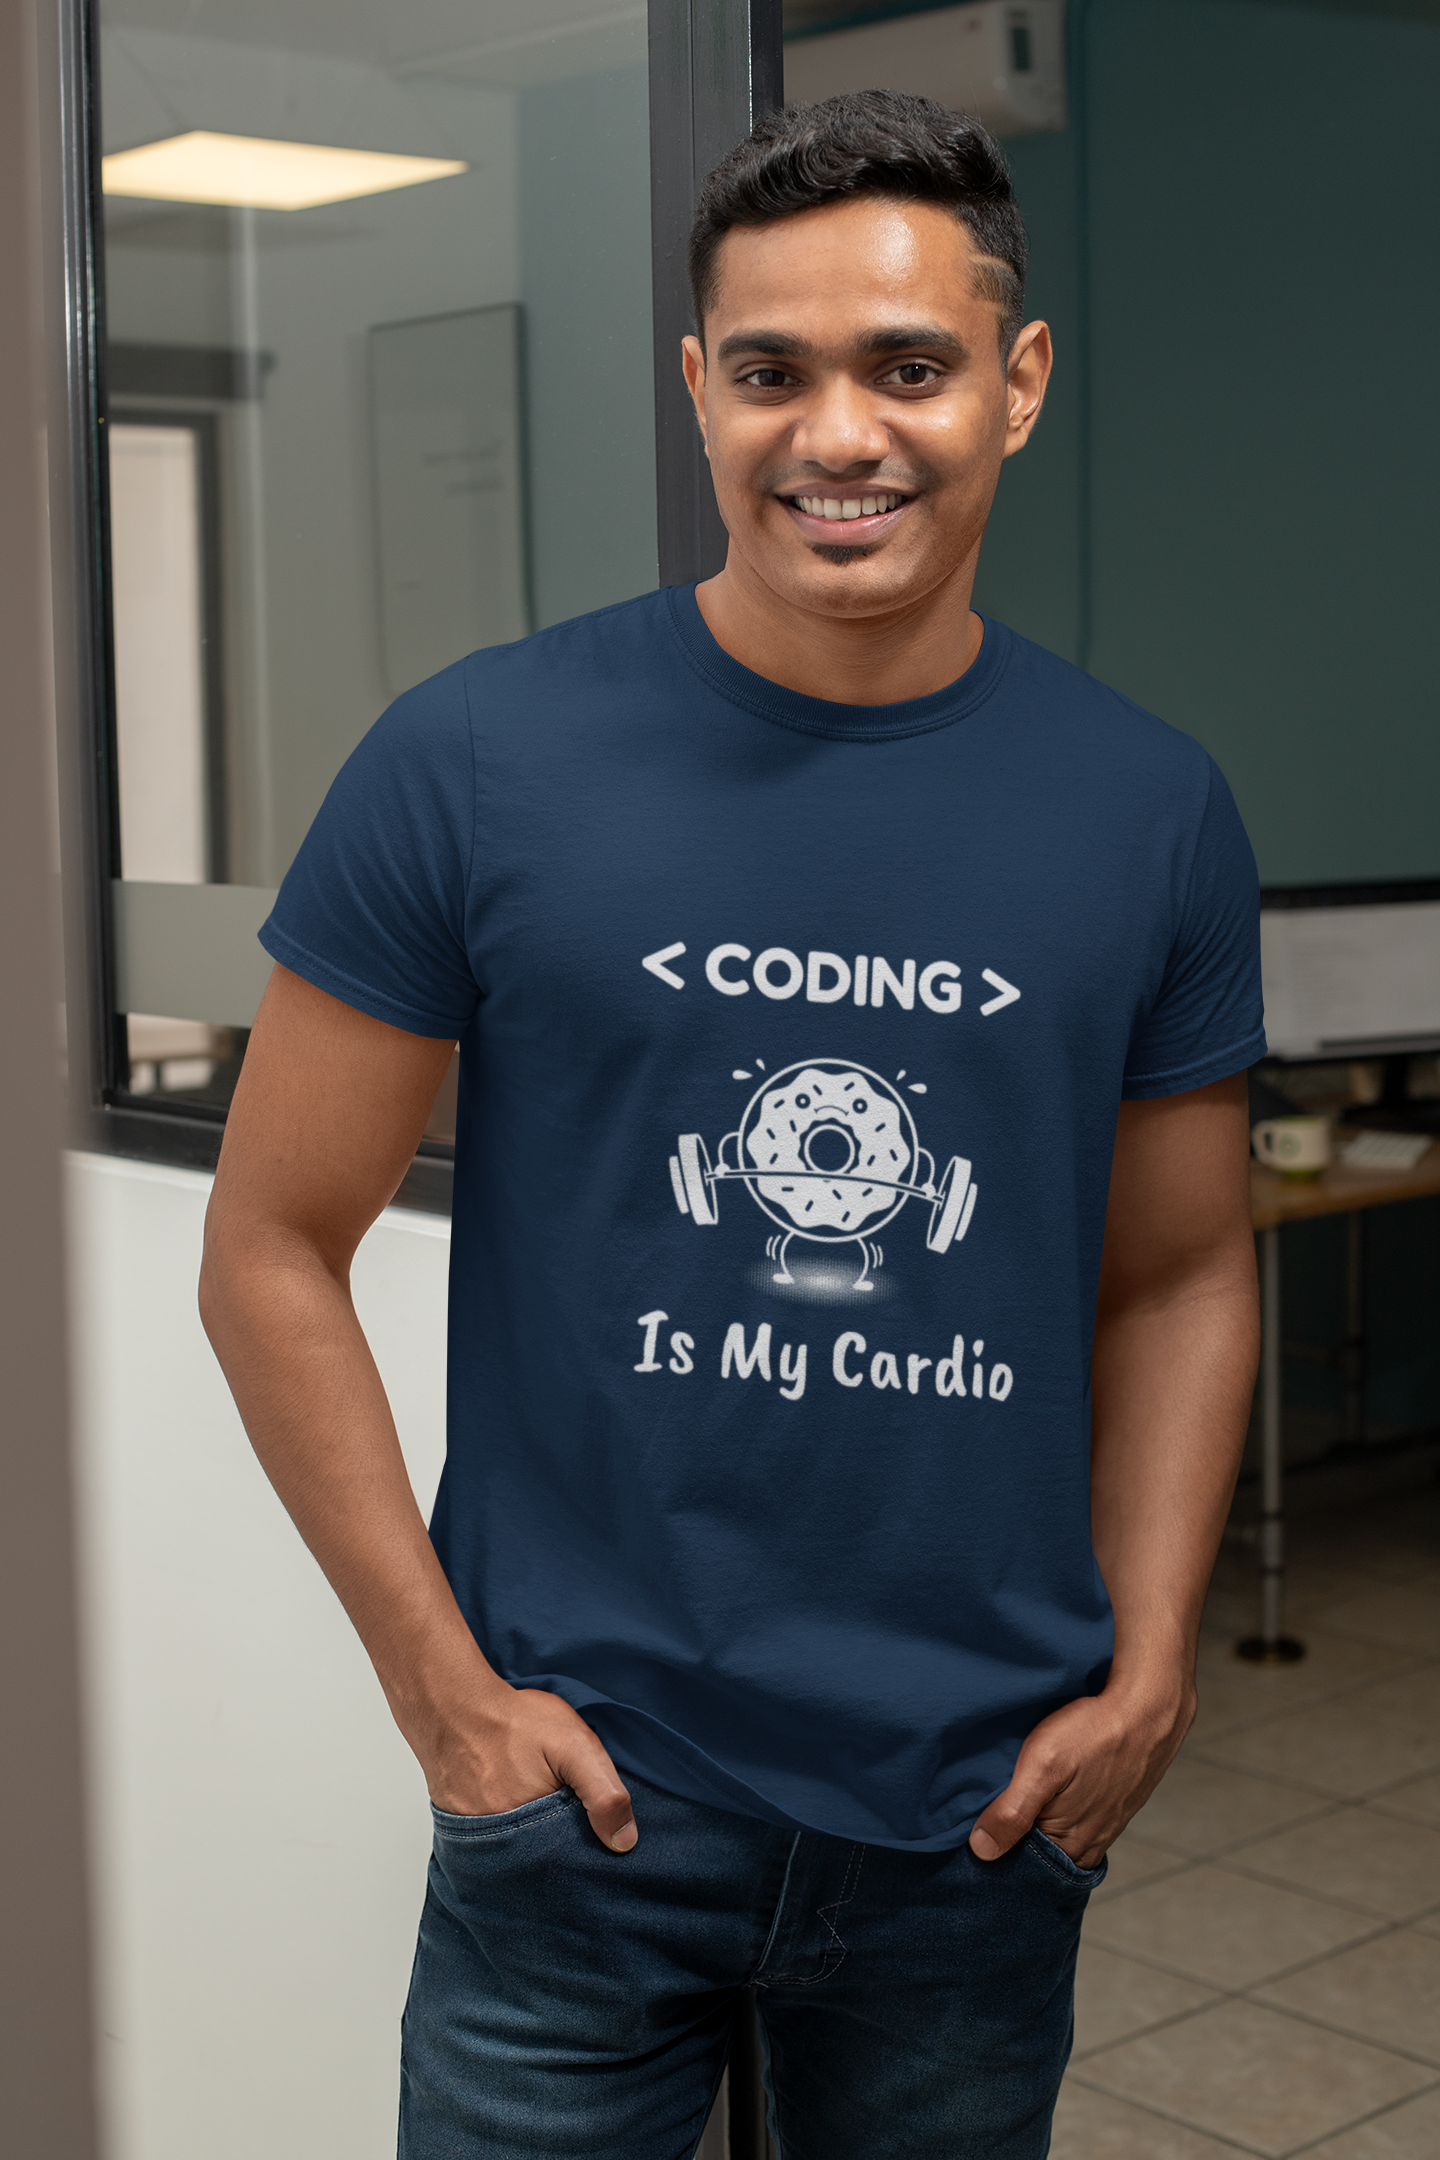 Coding Is My Cardio | T-Shirt For Developers & Coders